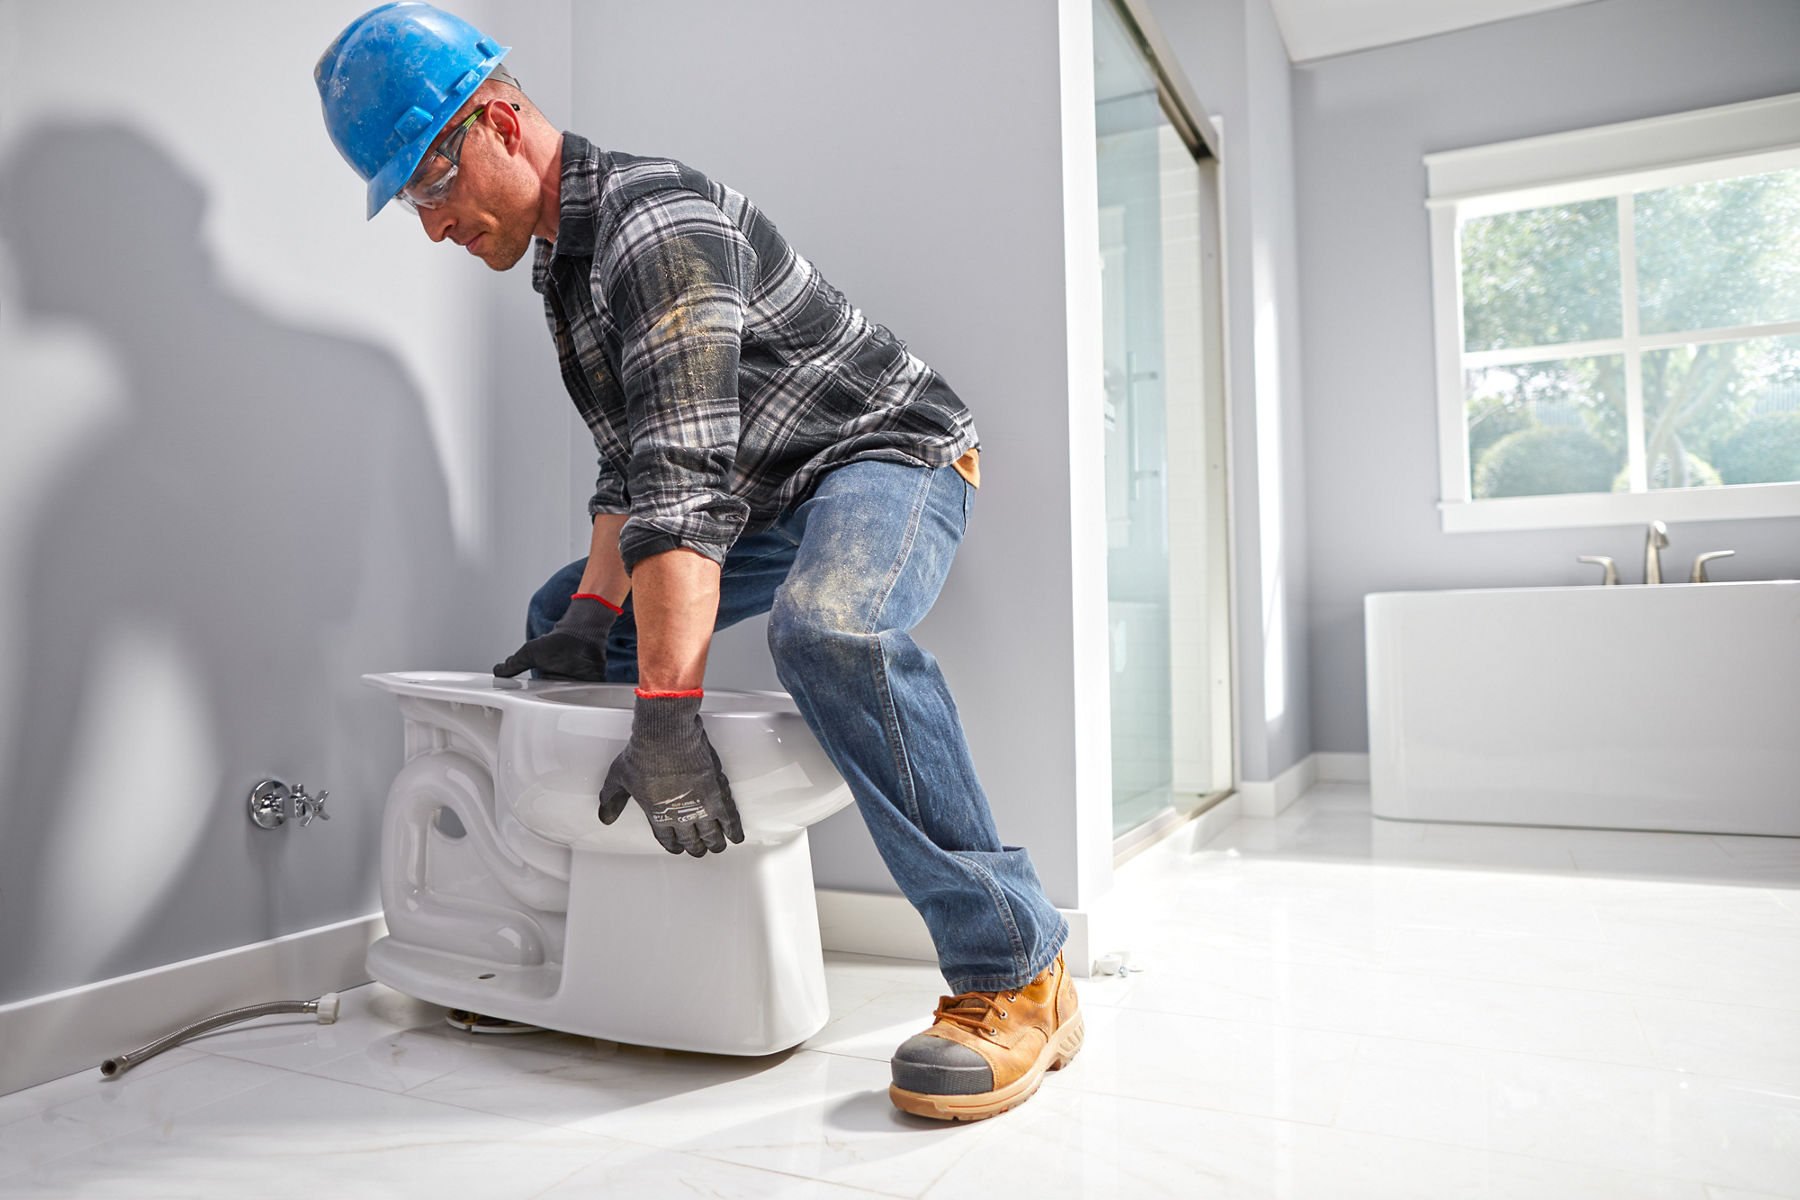 A man in a hardhat and yellow safety vest installing a white toilet bowl base in a pale grey bathroom.